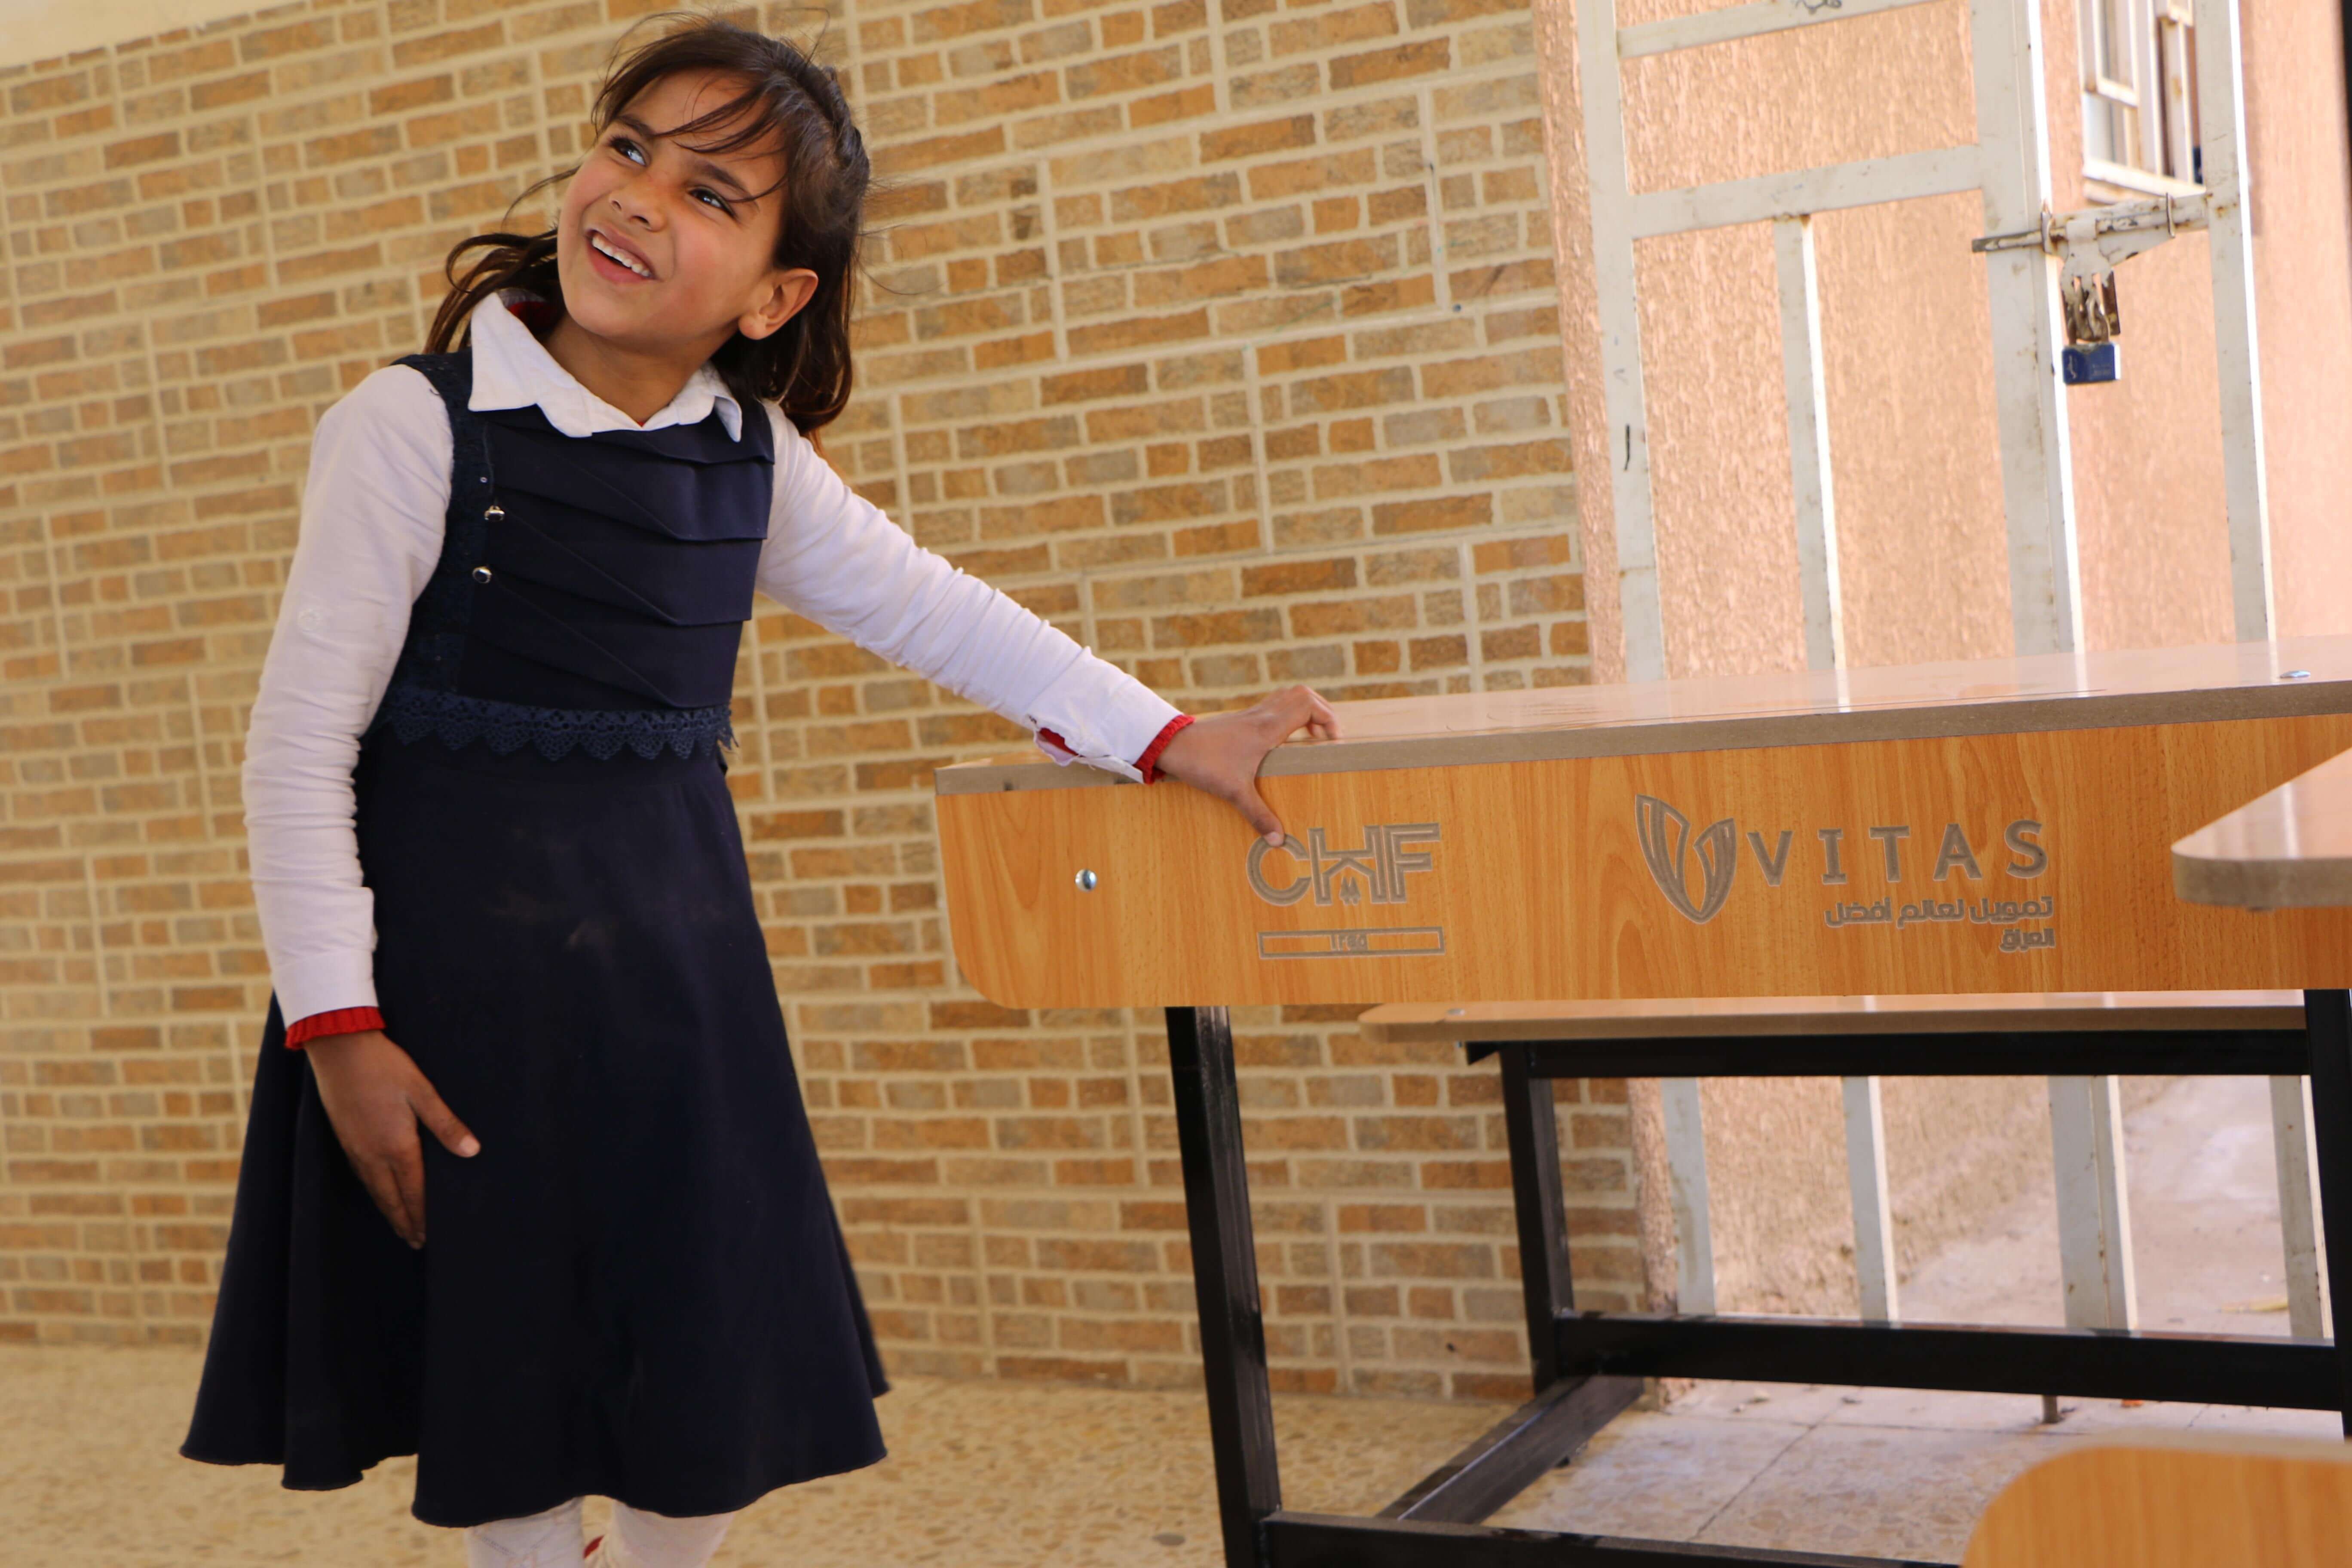 community events - CHF Vitas Iraq equips public schools with desks and whiteboards